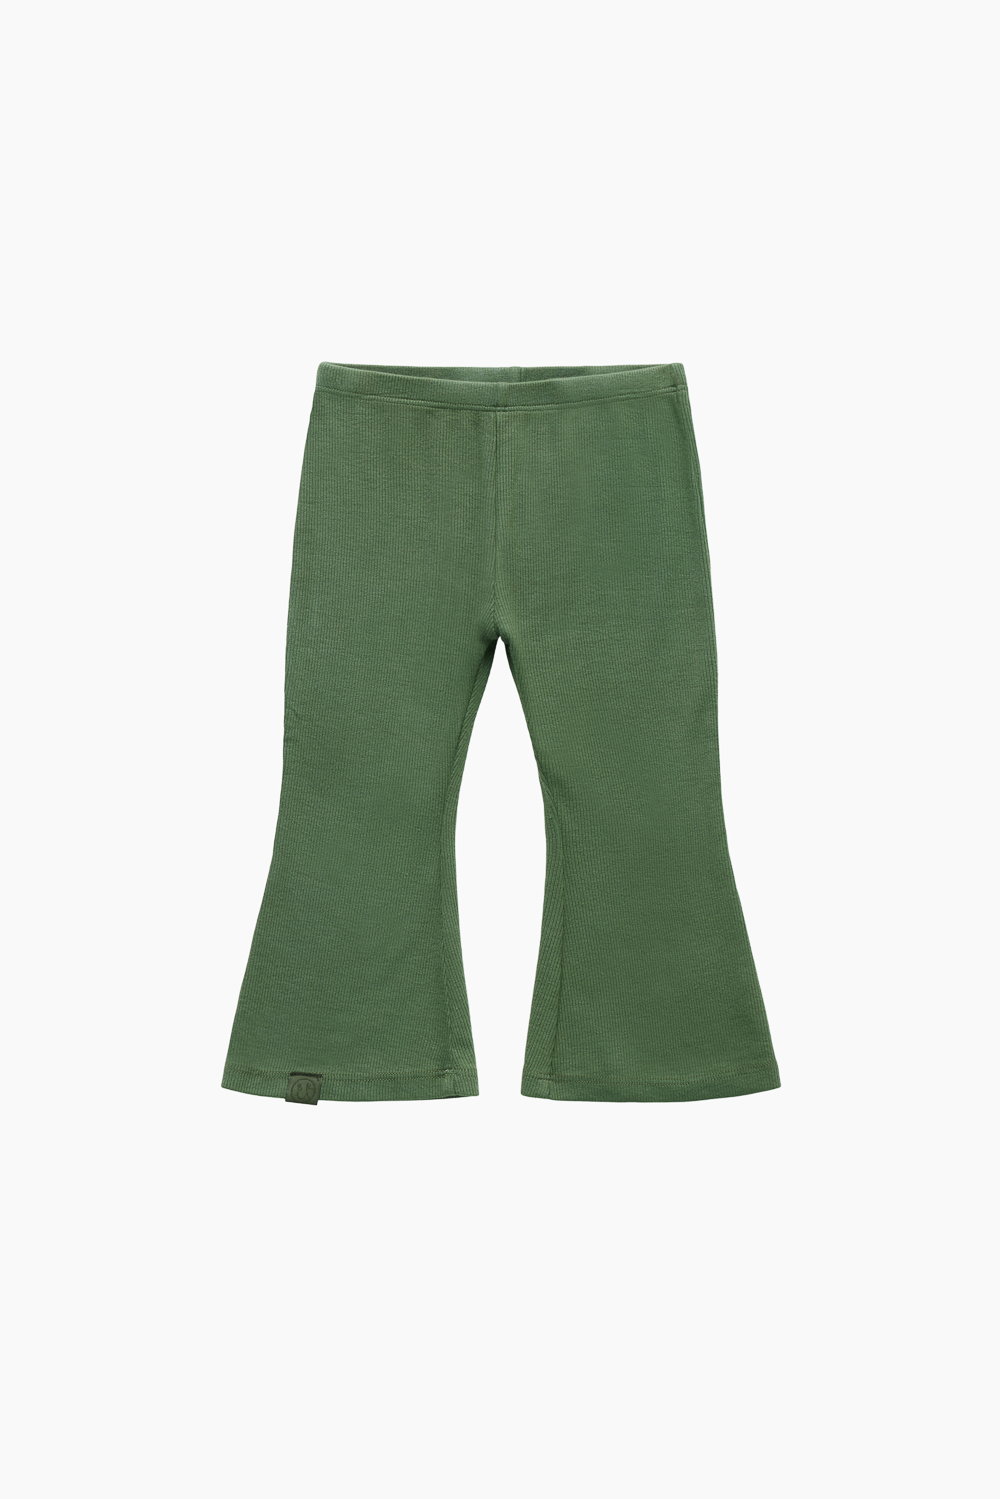 RIBBED MODAL KIDS FLARE PANTS - ROSEMARY Featured Image